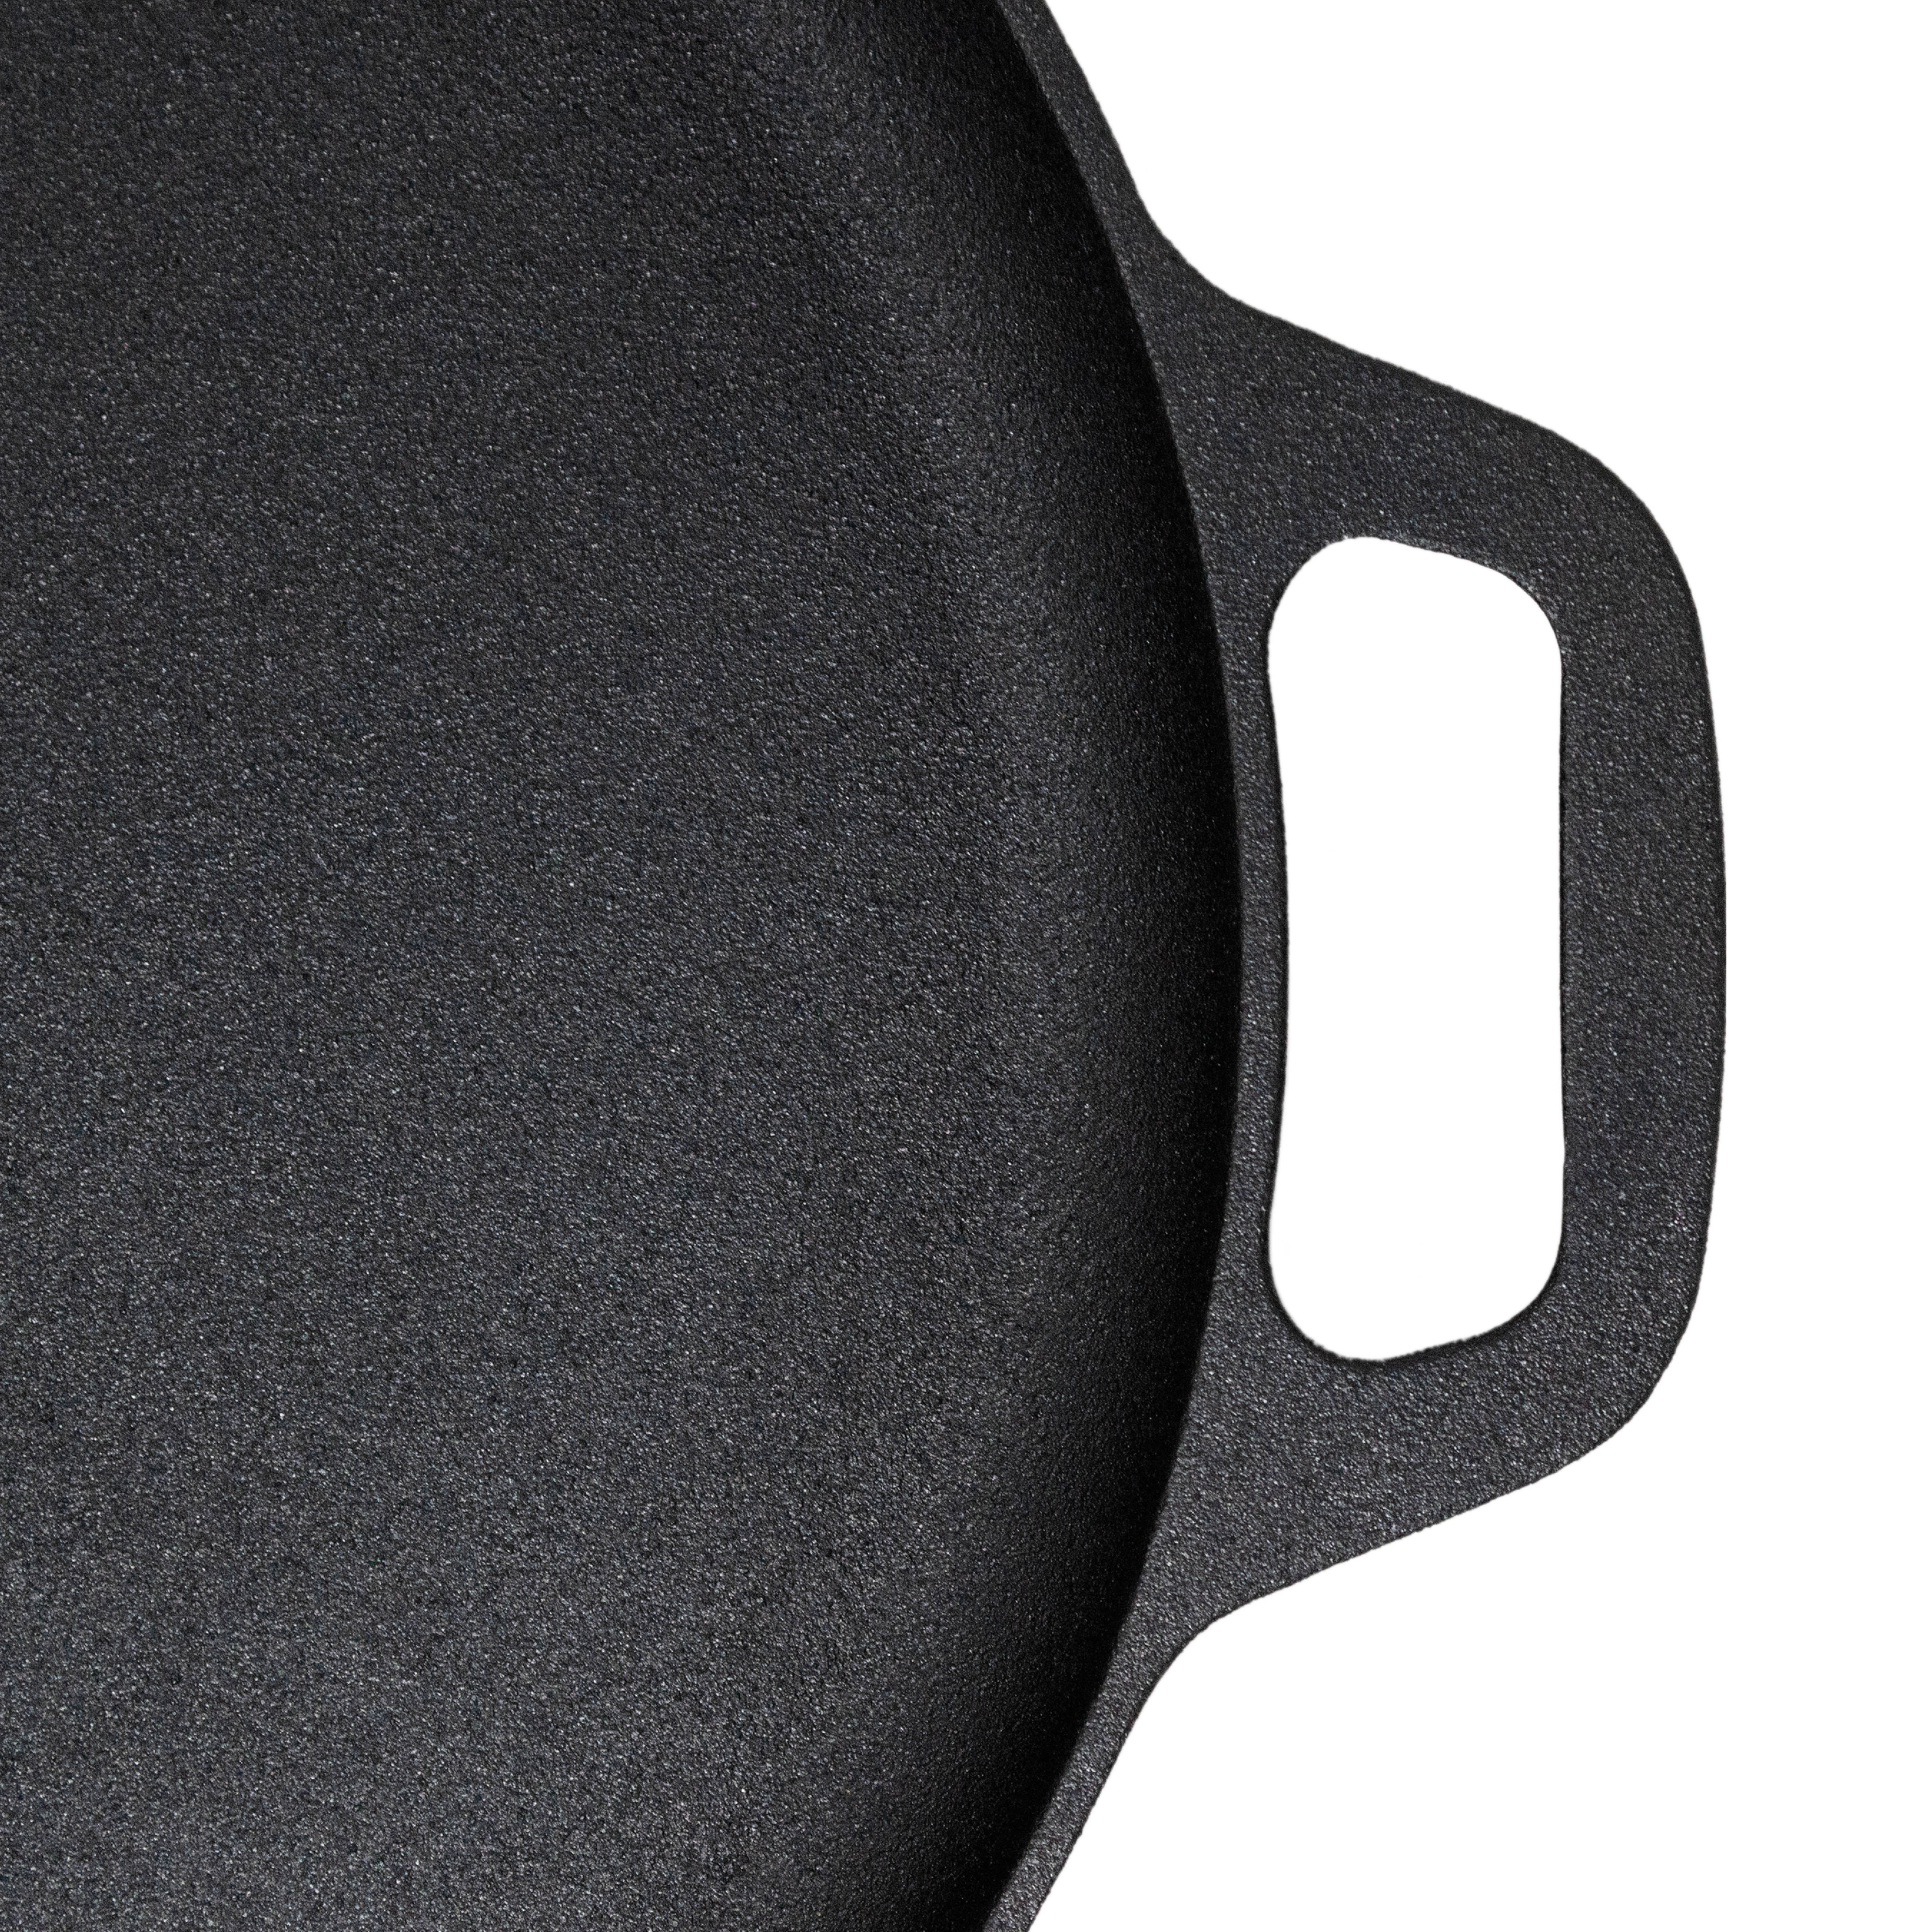 Cast Iron Pizza Pan-13.25 Inches Pre-Seasoned Skillet for Cooking